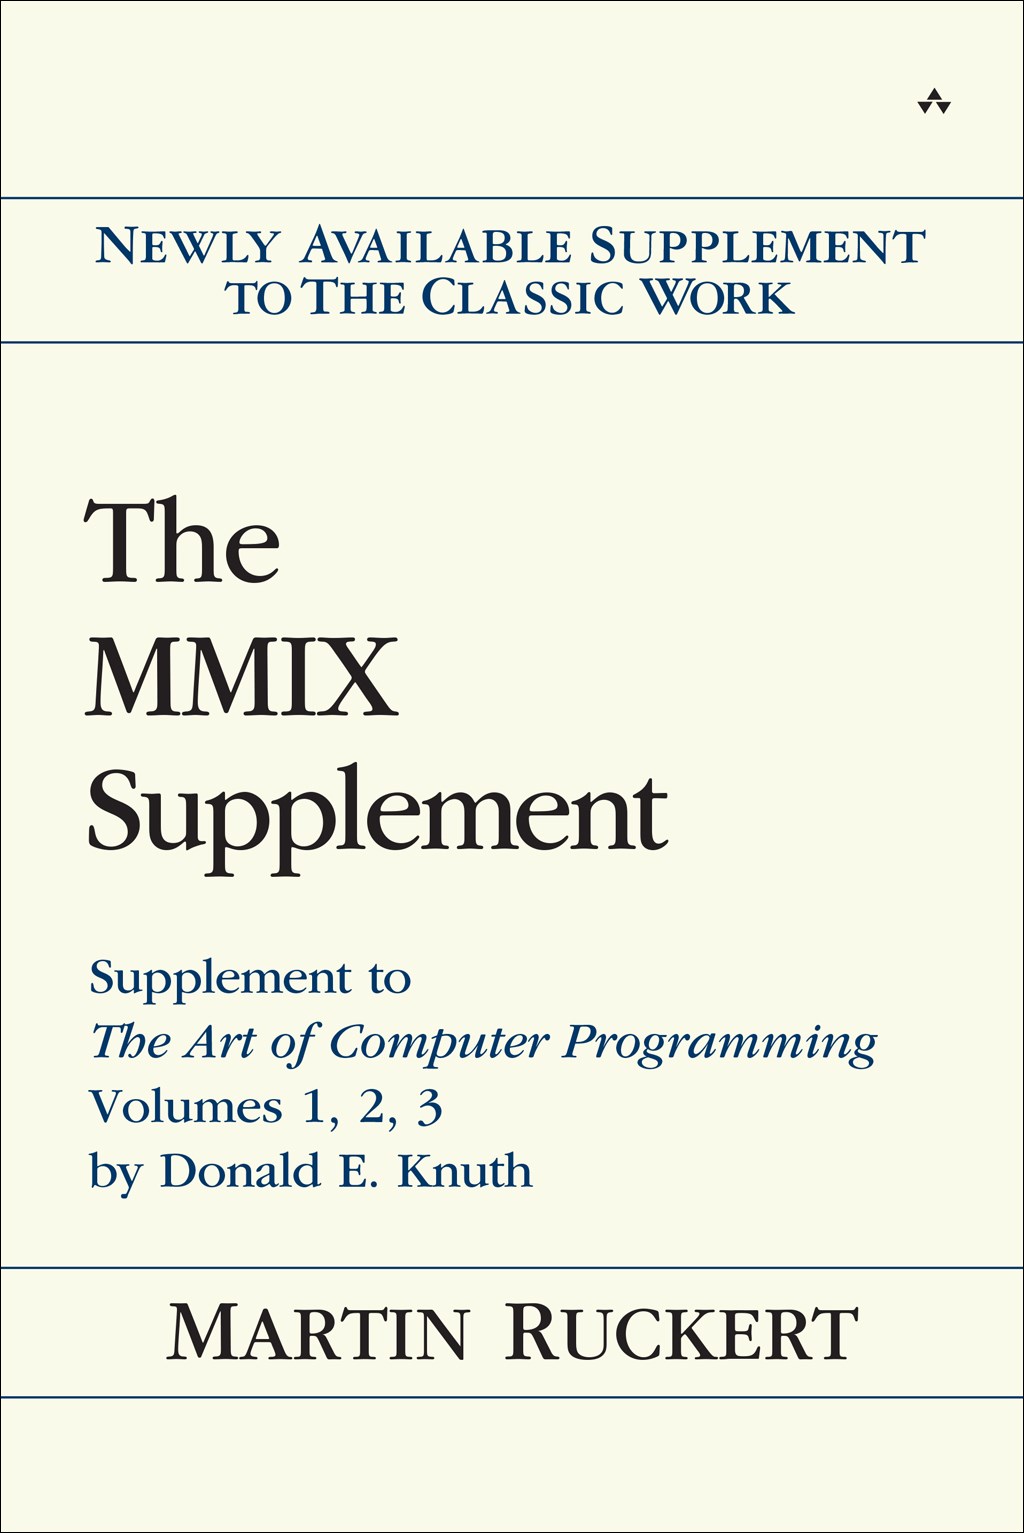 MMIX Supplement, The: Supplement to The Art of Computer Programming Volumes 1, 2, 3 by Donald E. Knuth